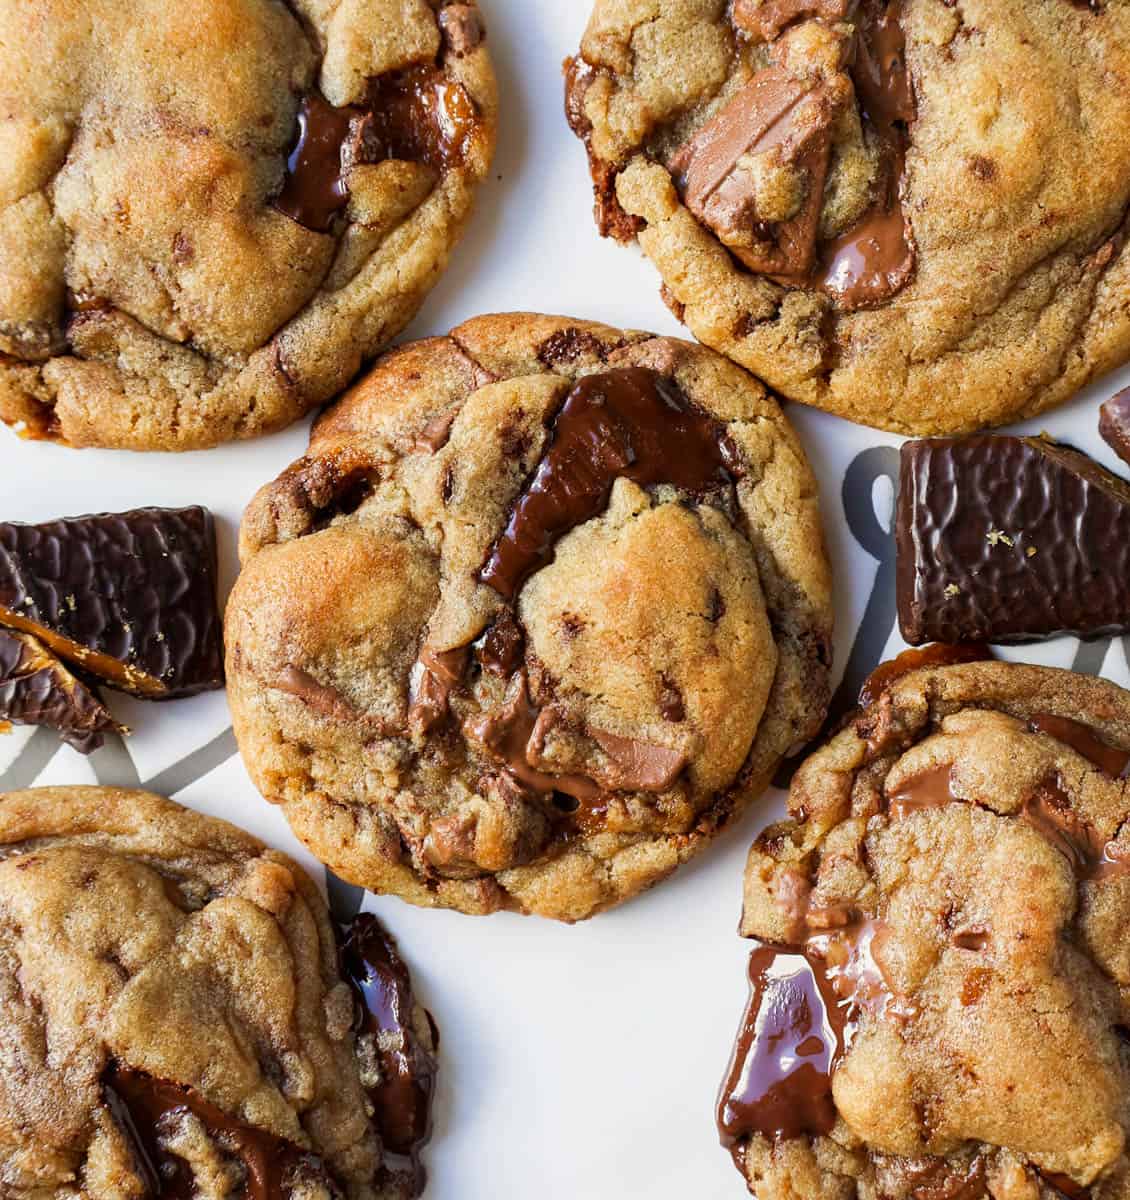 These are the Best Browned Butter Toffee Chocolate Chip Cookies that are perfectly soft and chewy with crisp edges and ooey gooey centers filled with chocolate and toffee chunks. 